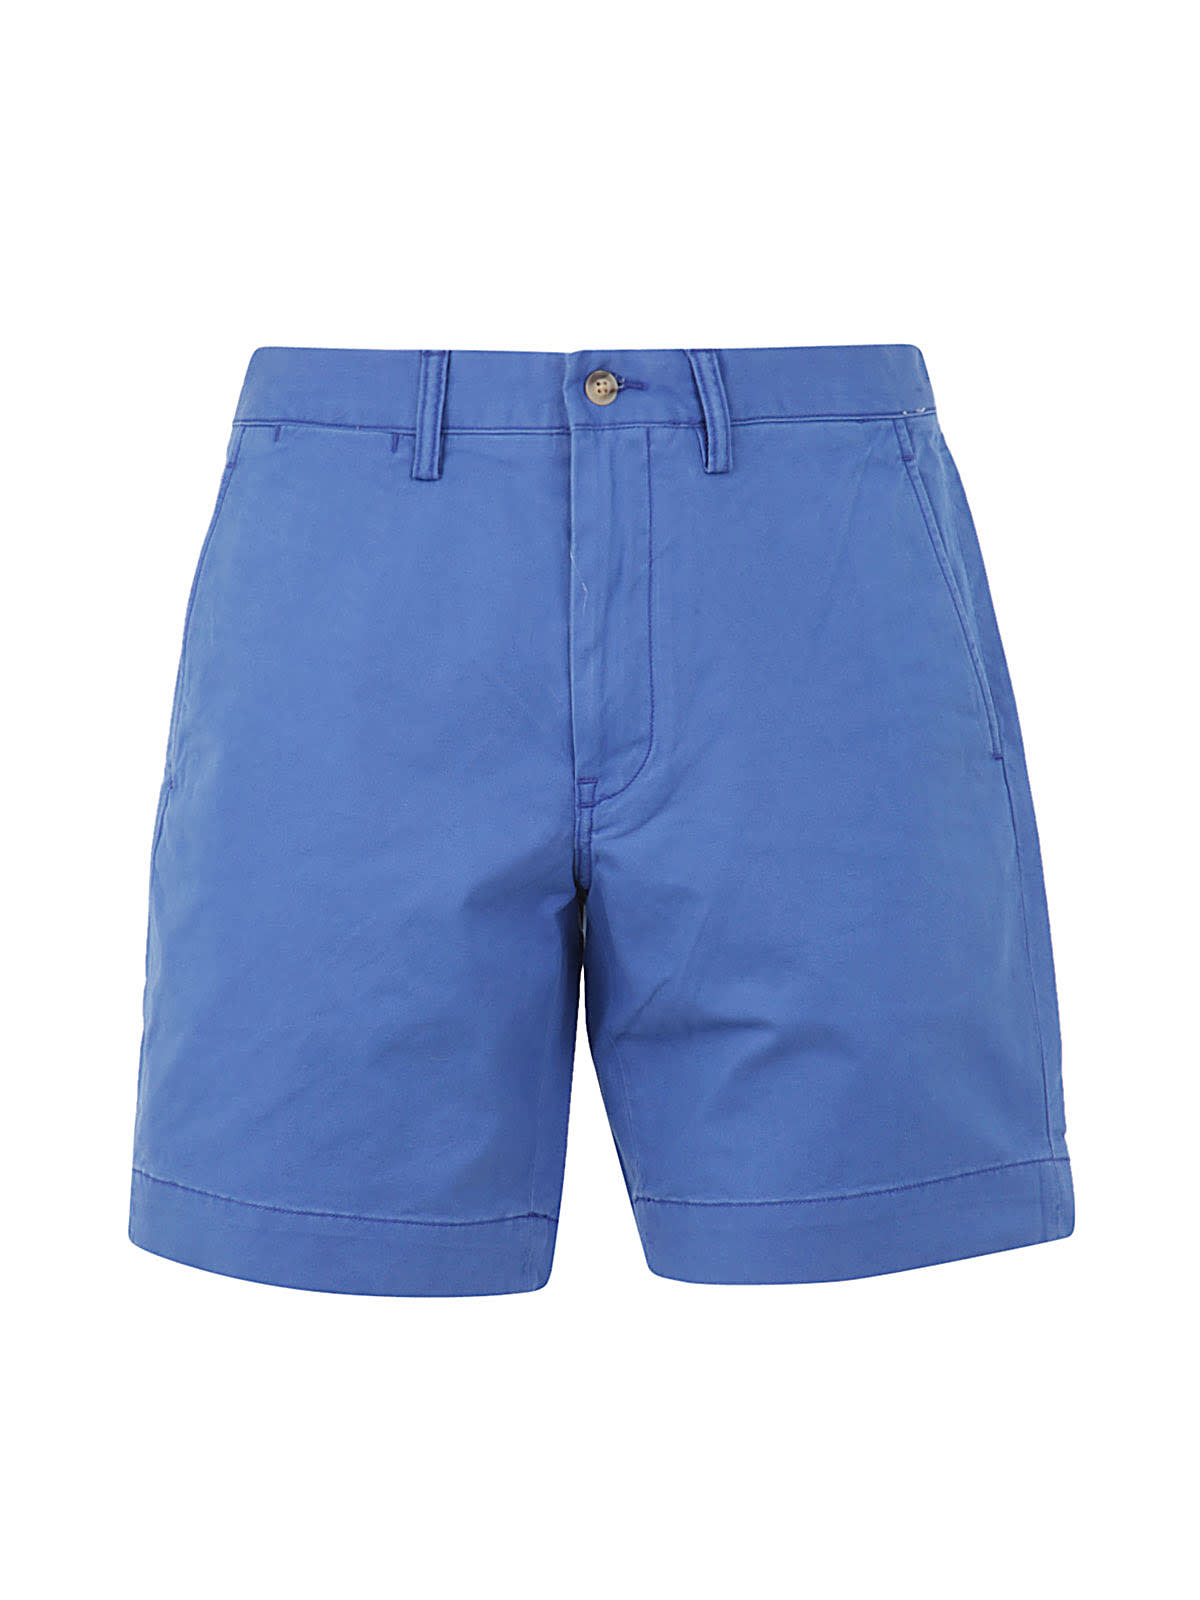 POLO RALPH LAUREN STRETCH TWILL FLAT FRONT SHORTS